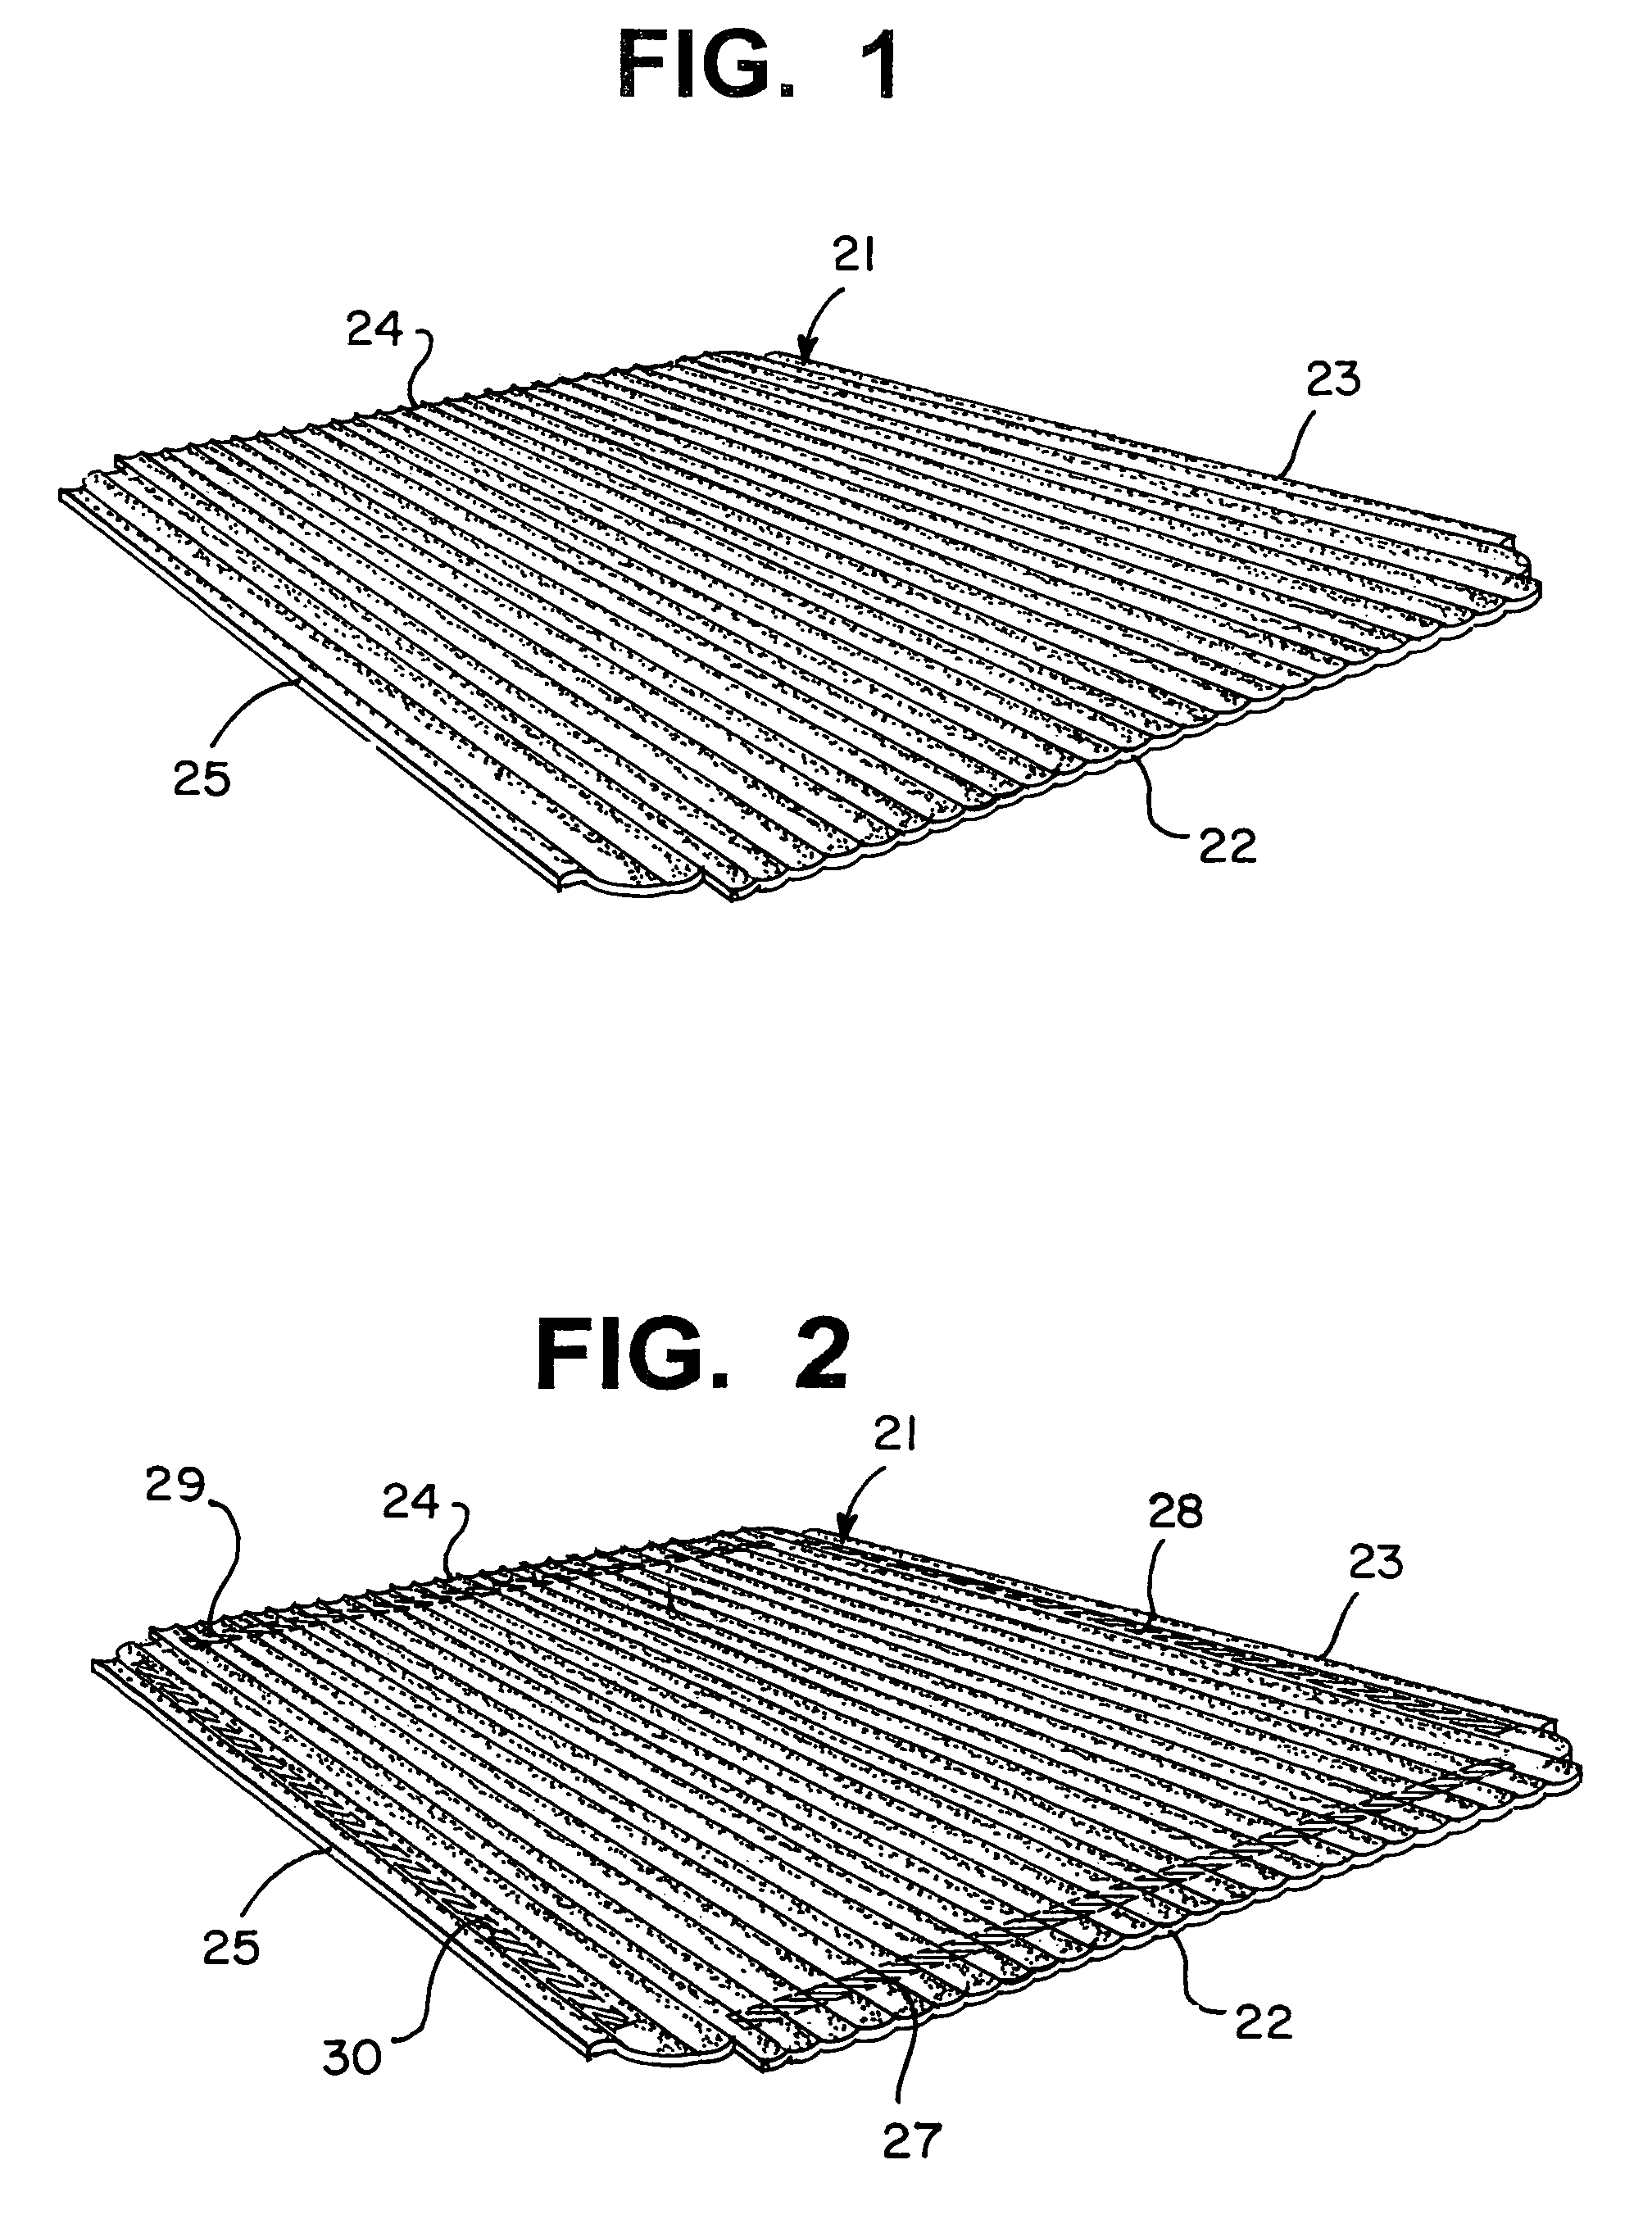 Method for manufacturing enhanced foam thermoplastic products